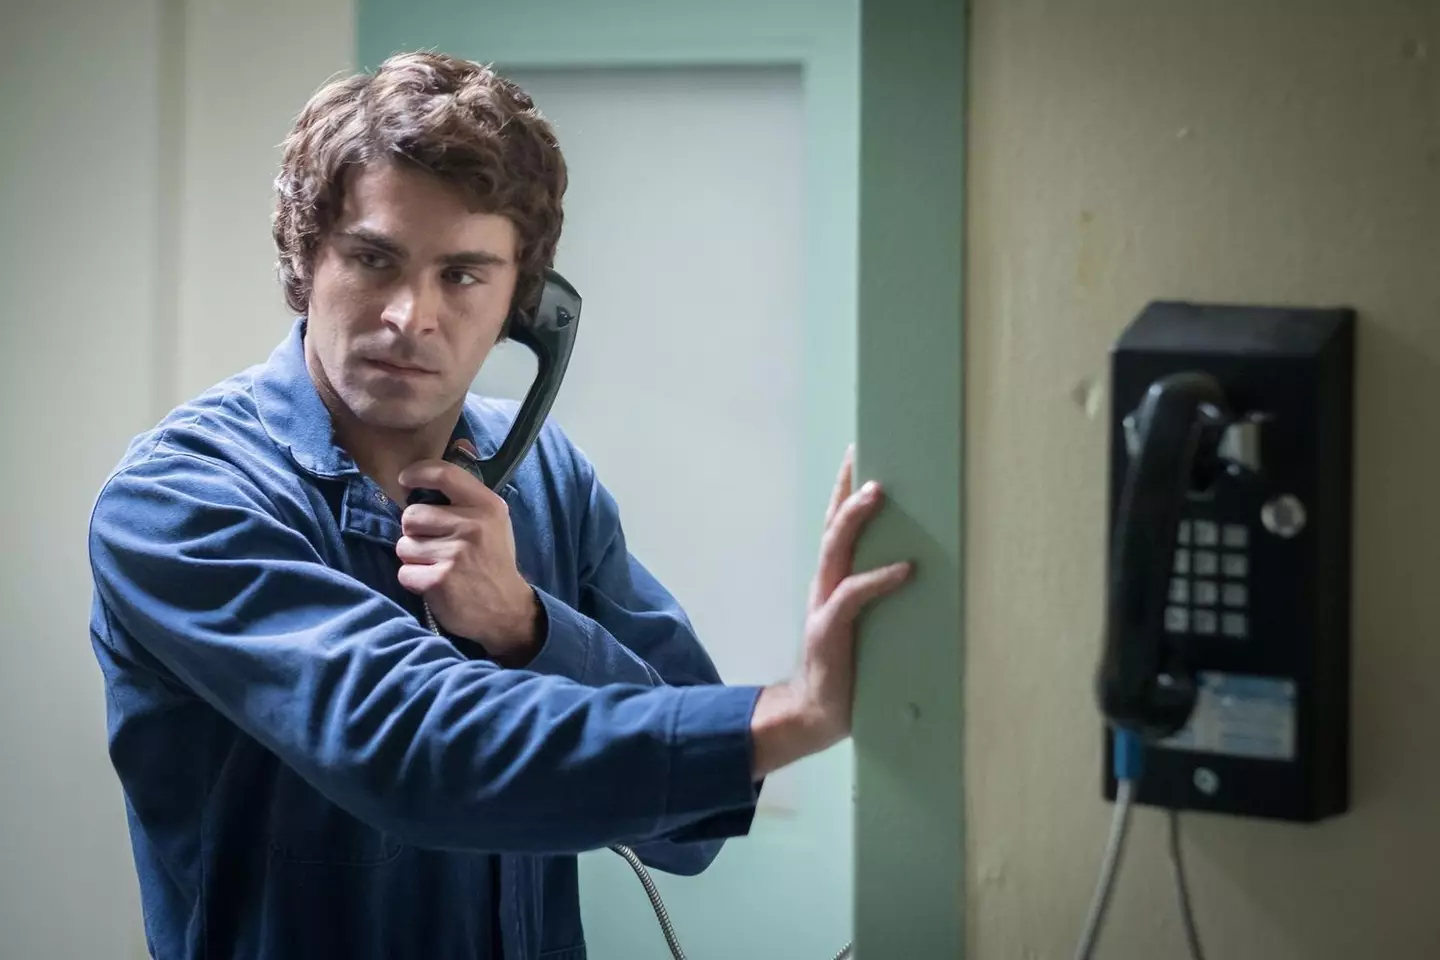 Zac Efron as Ted Bundy in Extremely Wicked, Shockingly Evil and Vile. (Netflix)